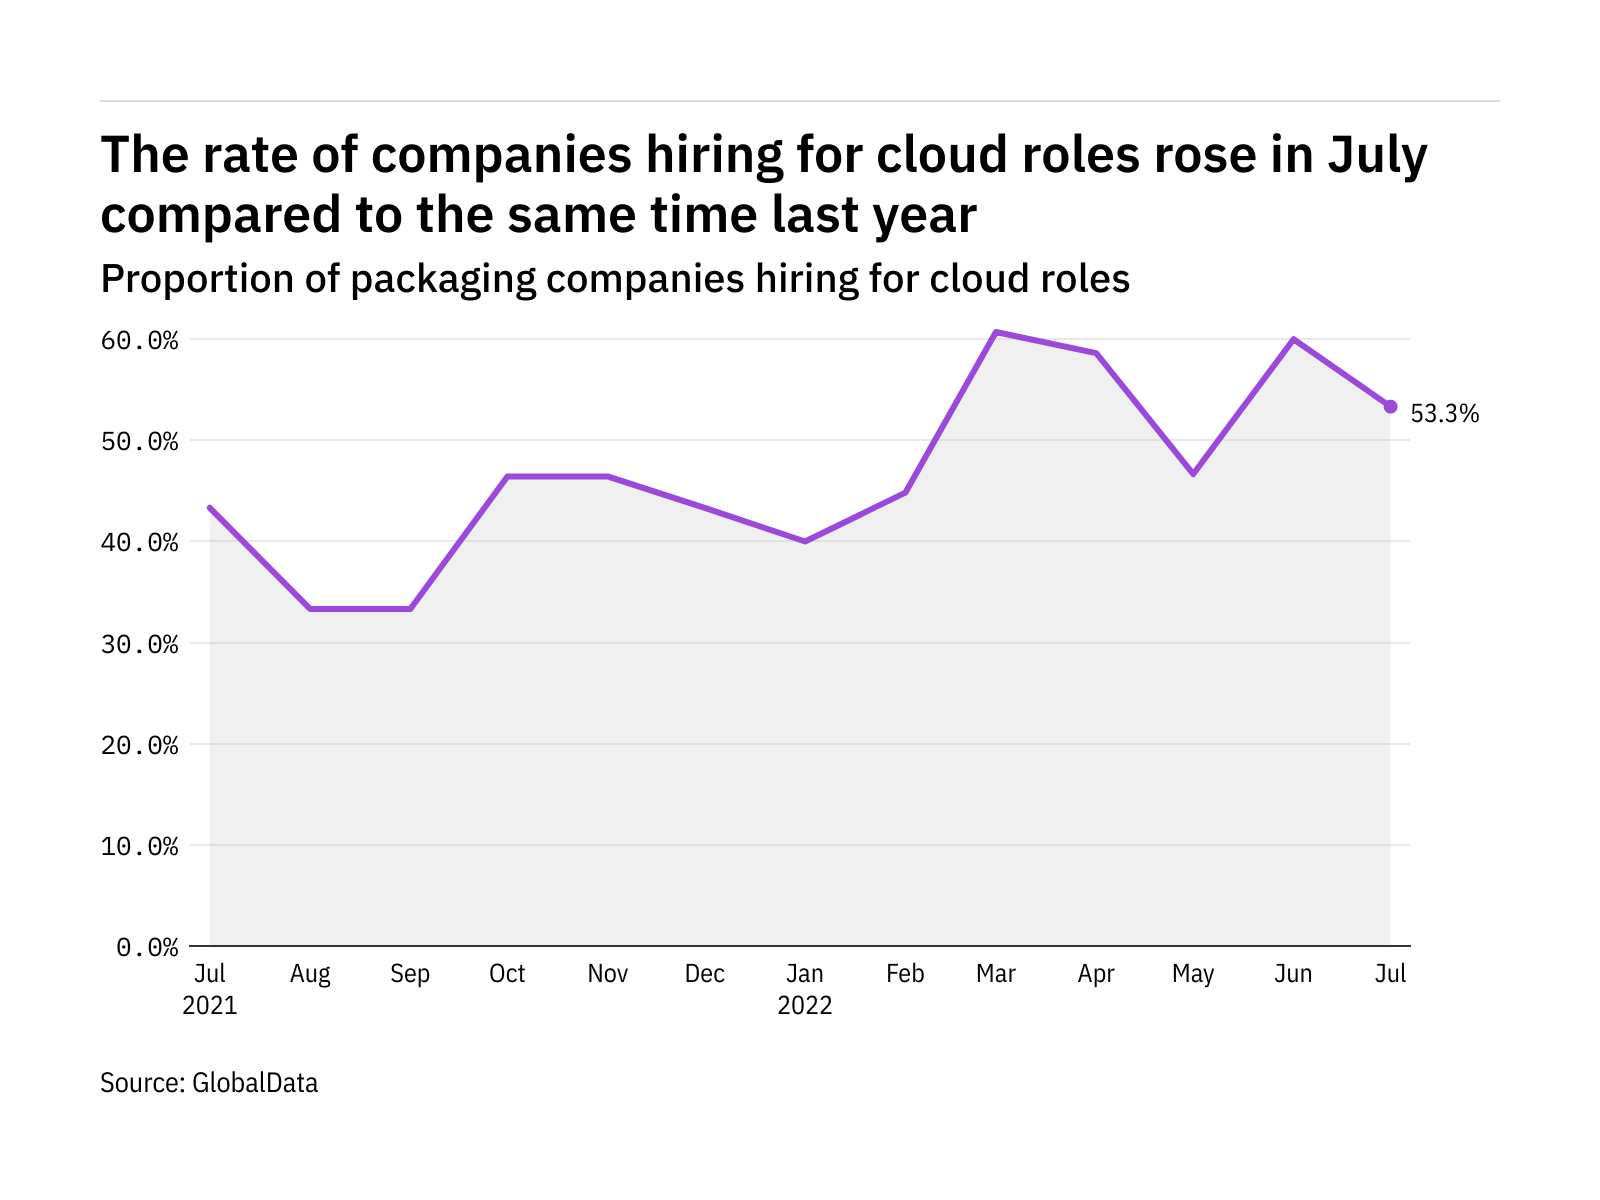 Cloud hiring levels in the packaging industry rose in July 2022